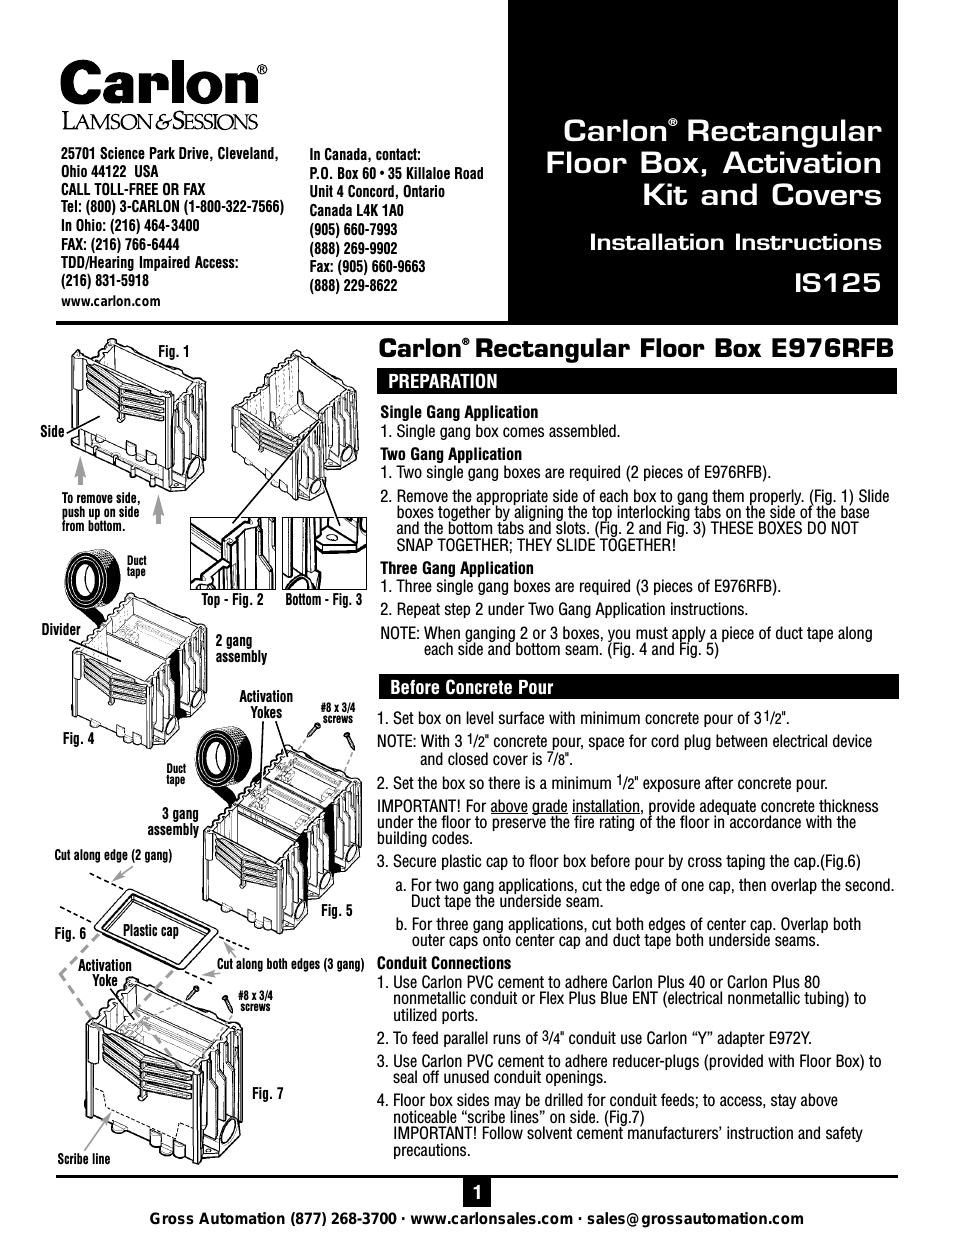 Rectangular Floor Box, Activation Kit, and Covers